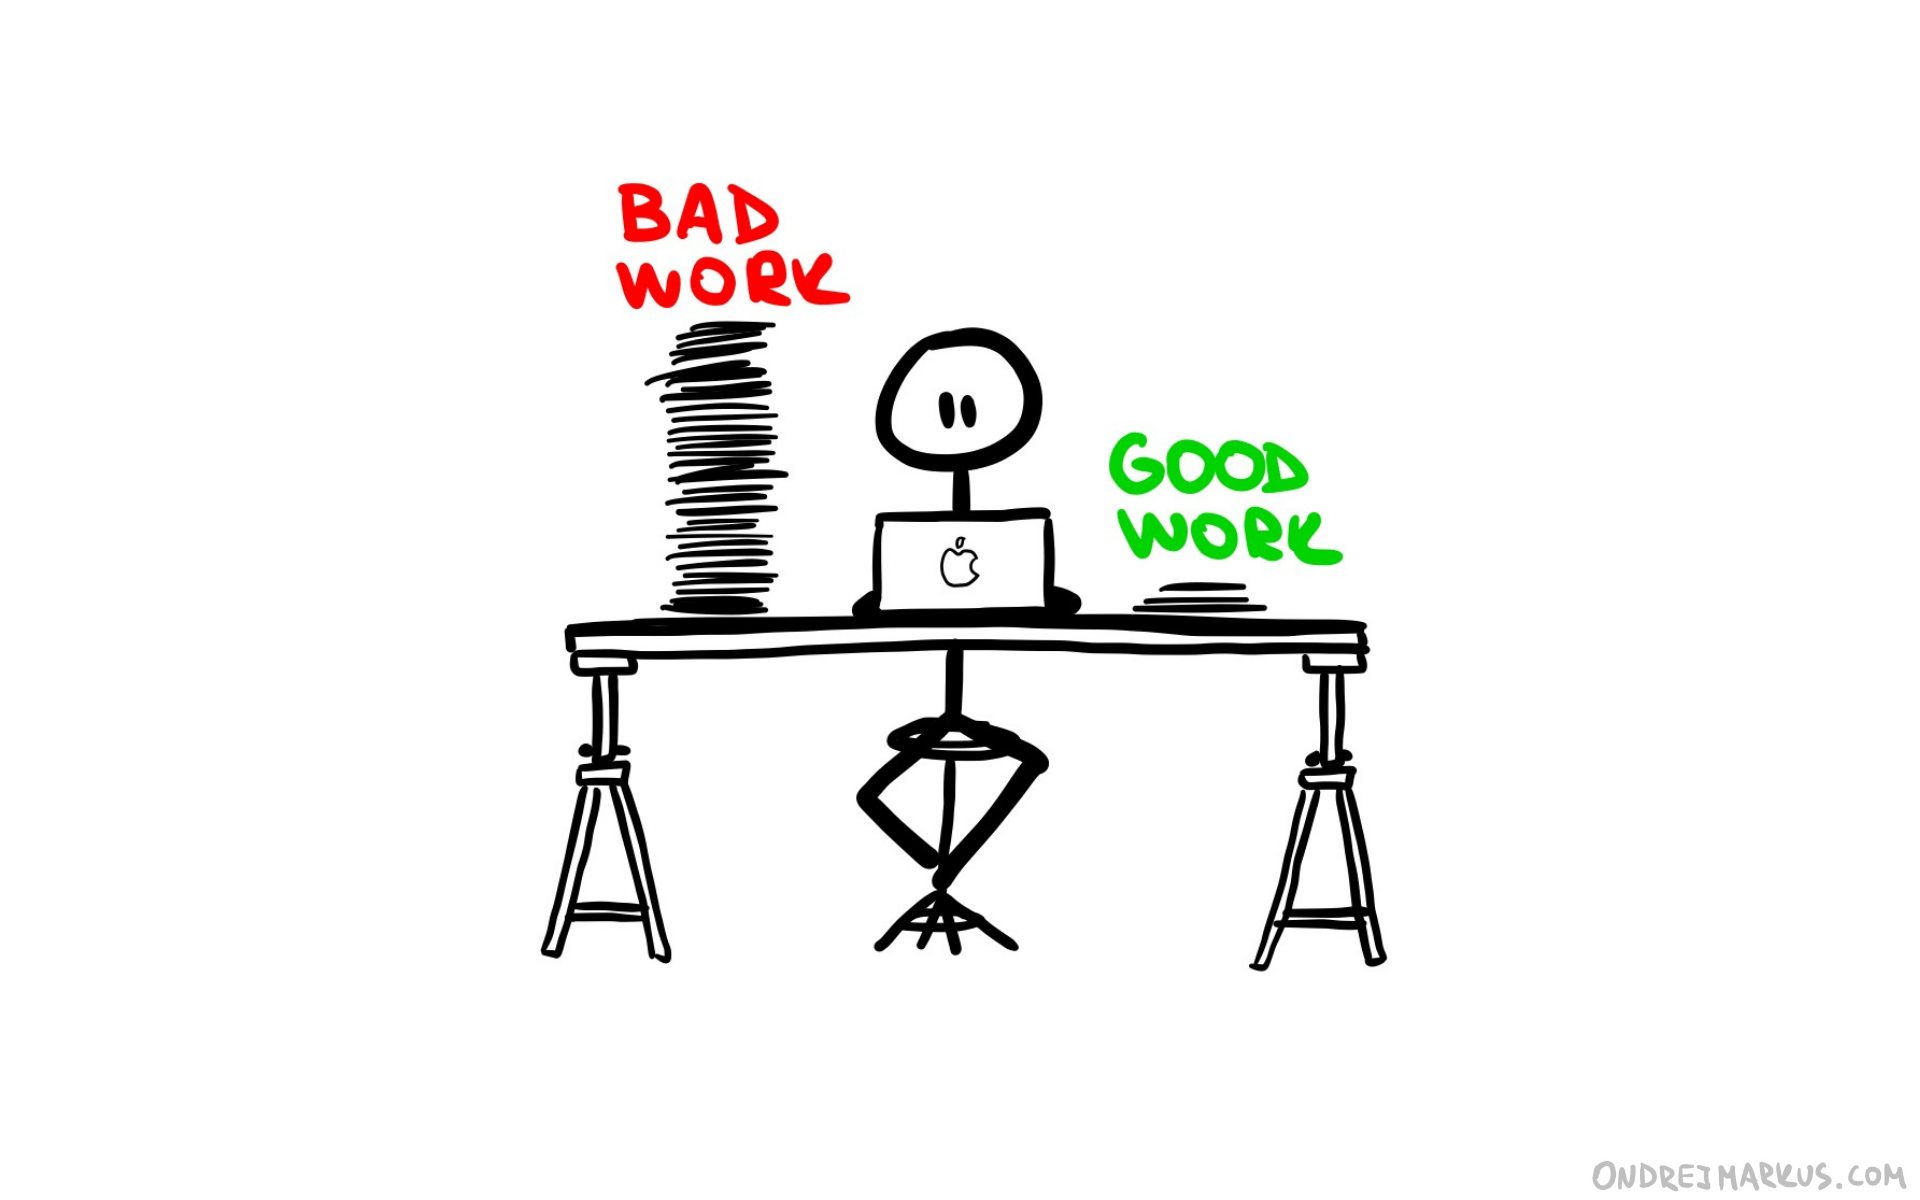 2020: The ballad for bad work